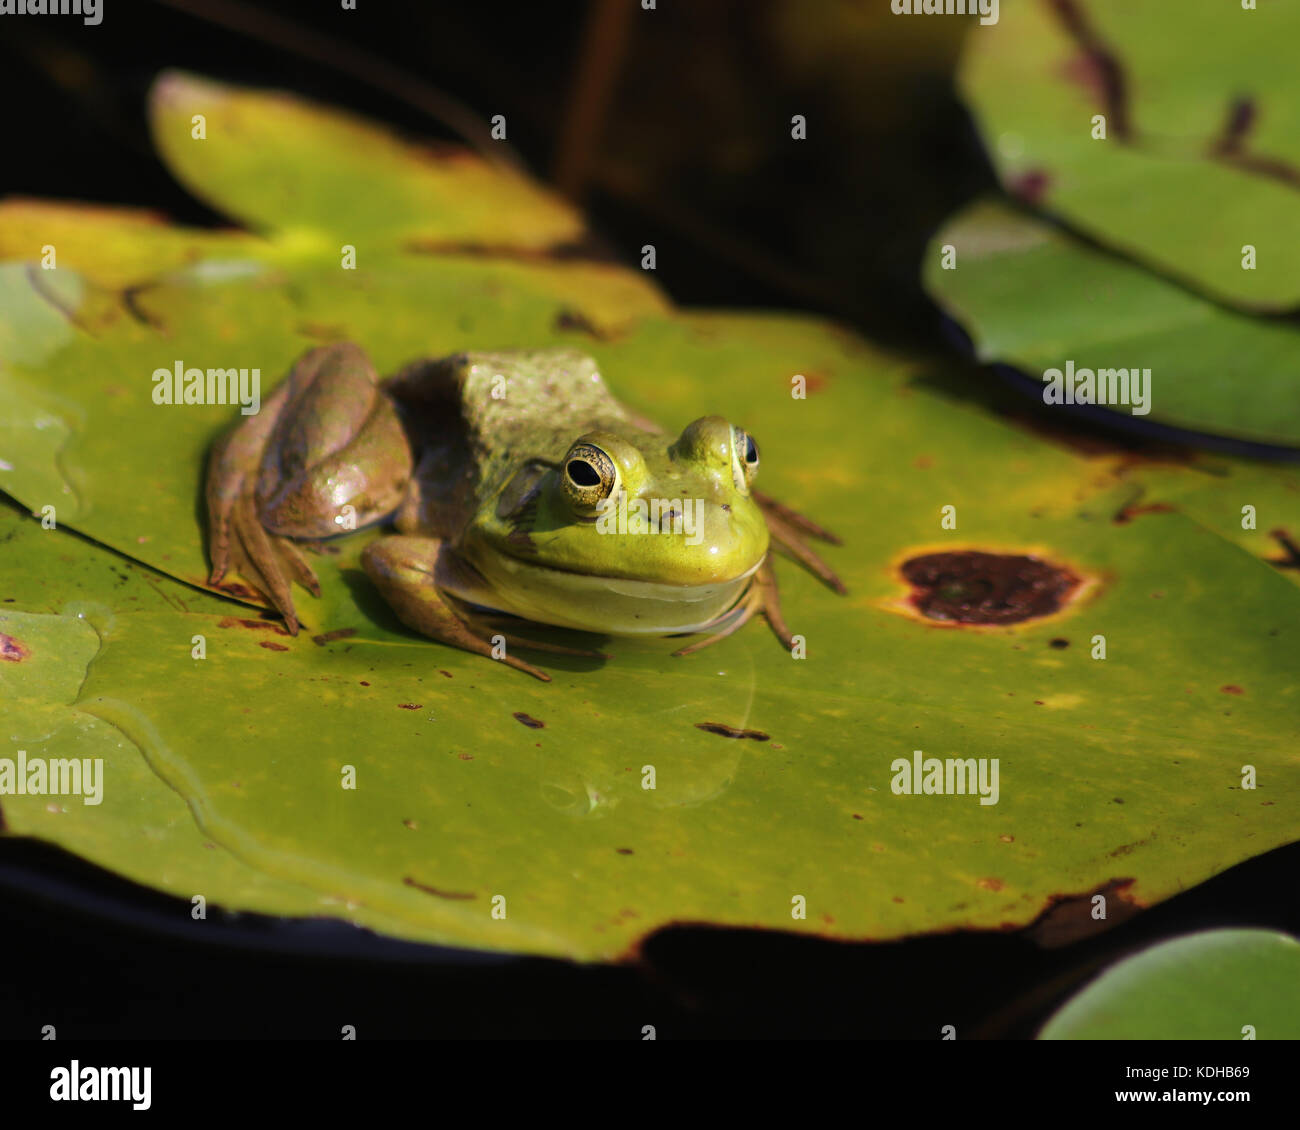 A Bullfrog floating on a green lily pad in Trustom Pond, South Kingstown, Rhode Island Stock Photo